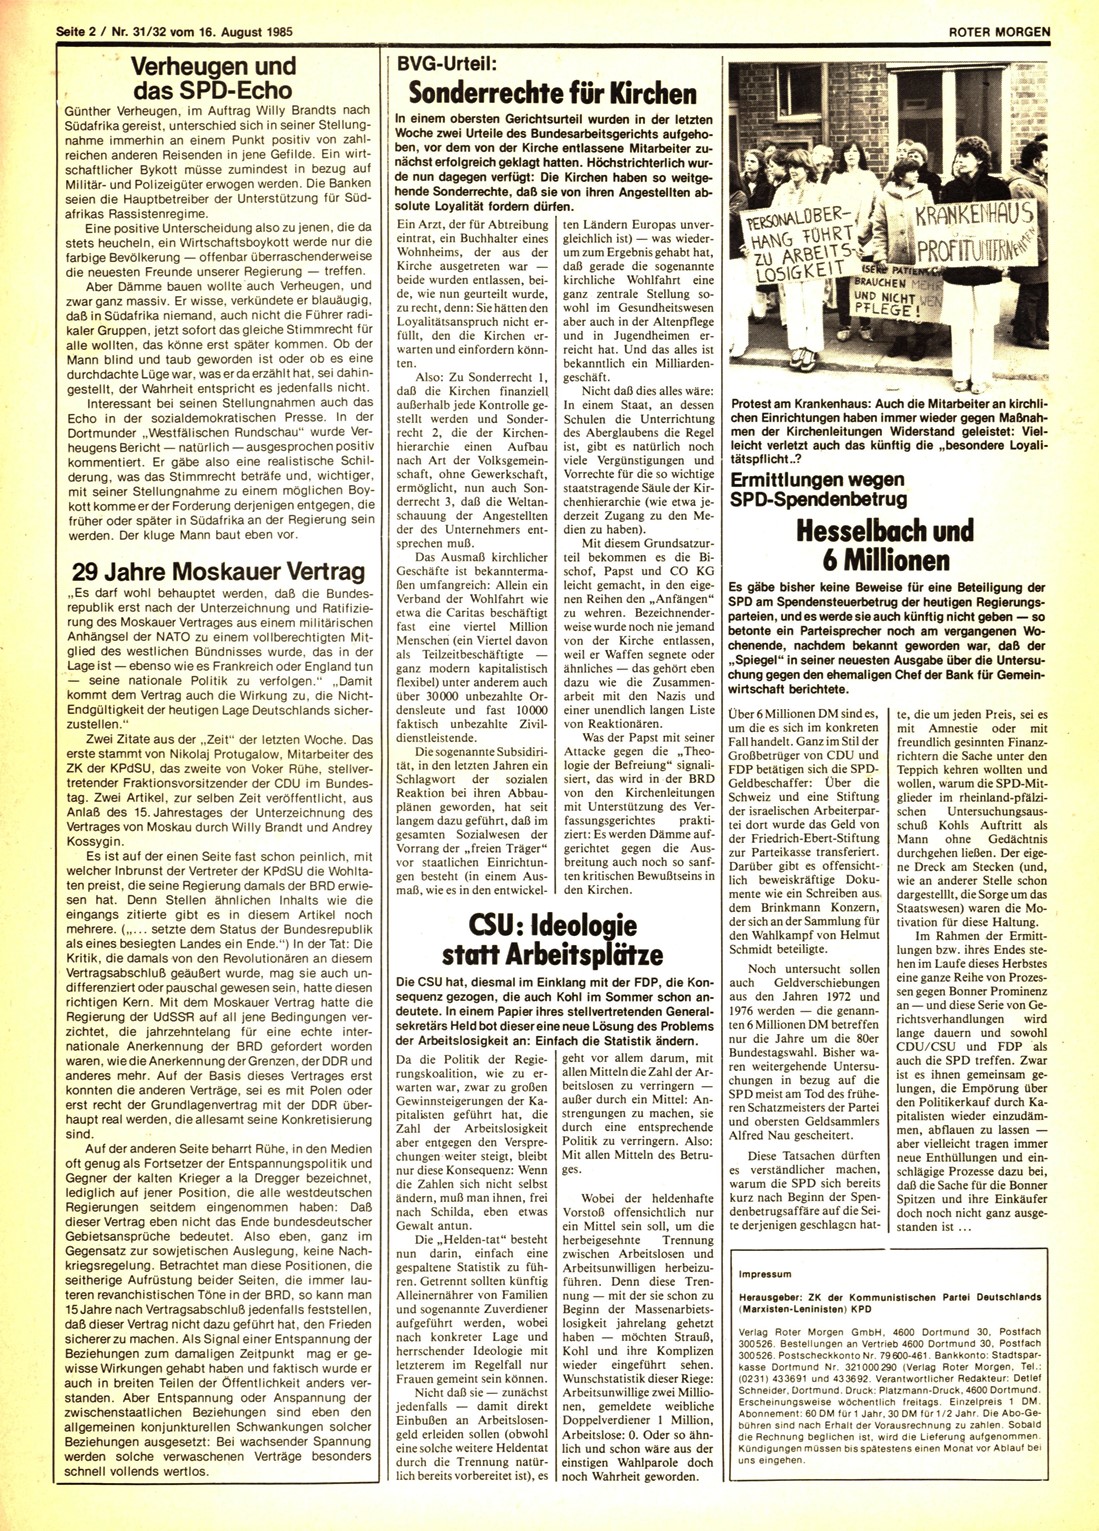 Roter Morgen, 19. Jg., 16. August 1985, Nr. 31/32, Seite 2